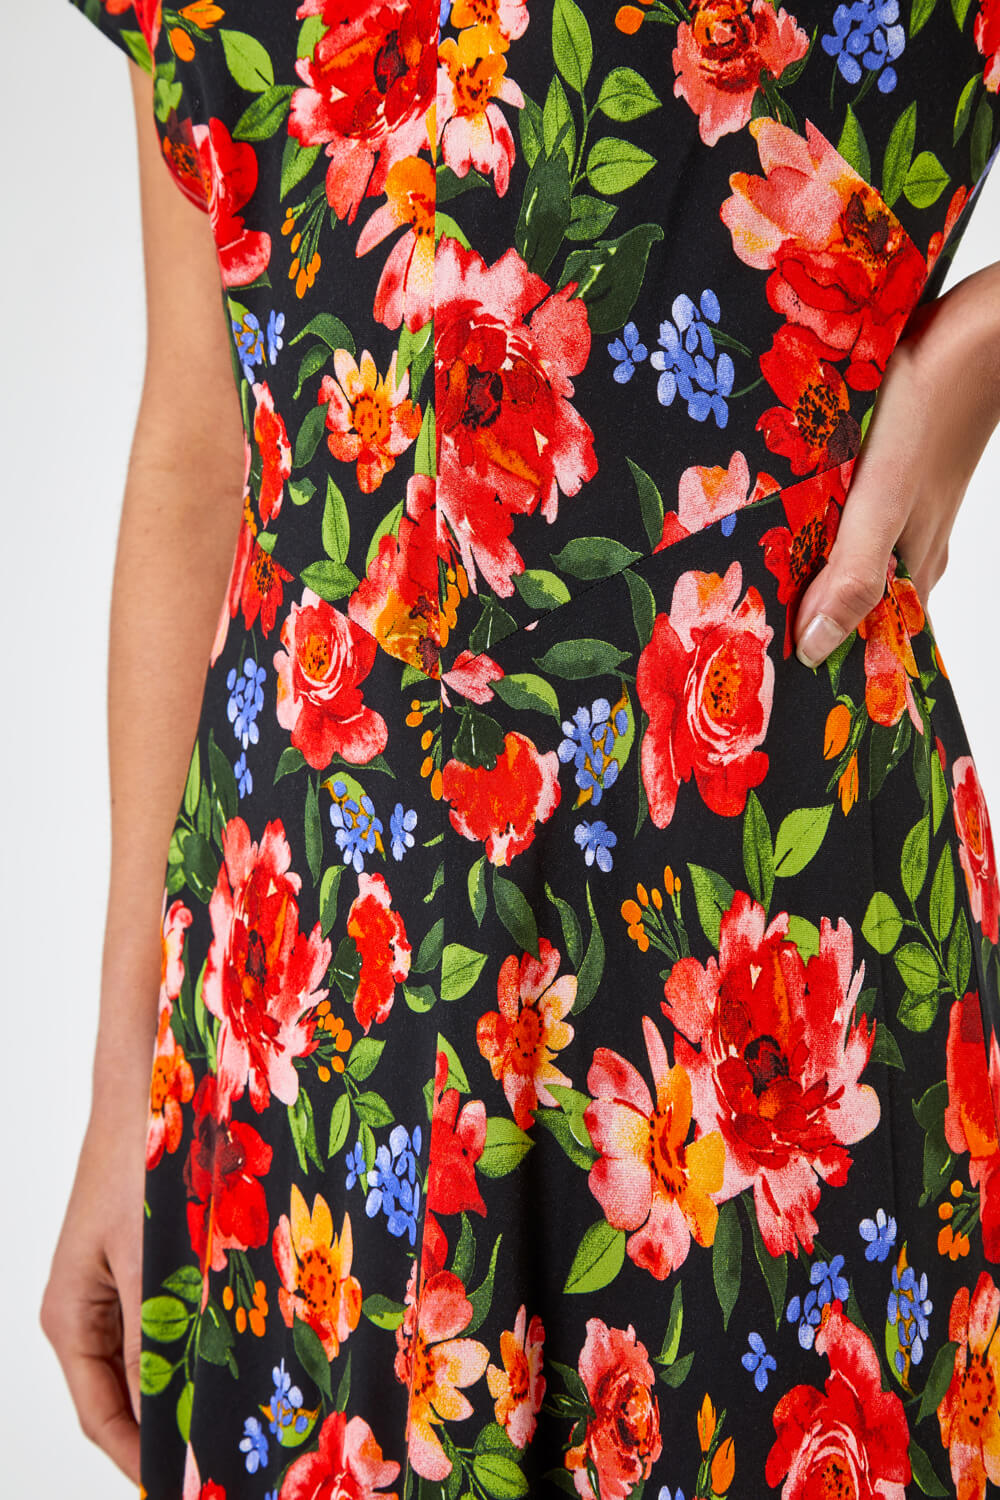 Red Floral Print Fit & Flare Midi Dress, Image 5 of 5